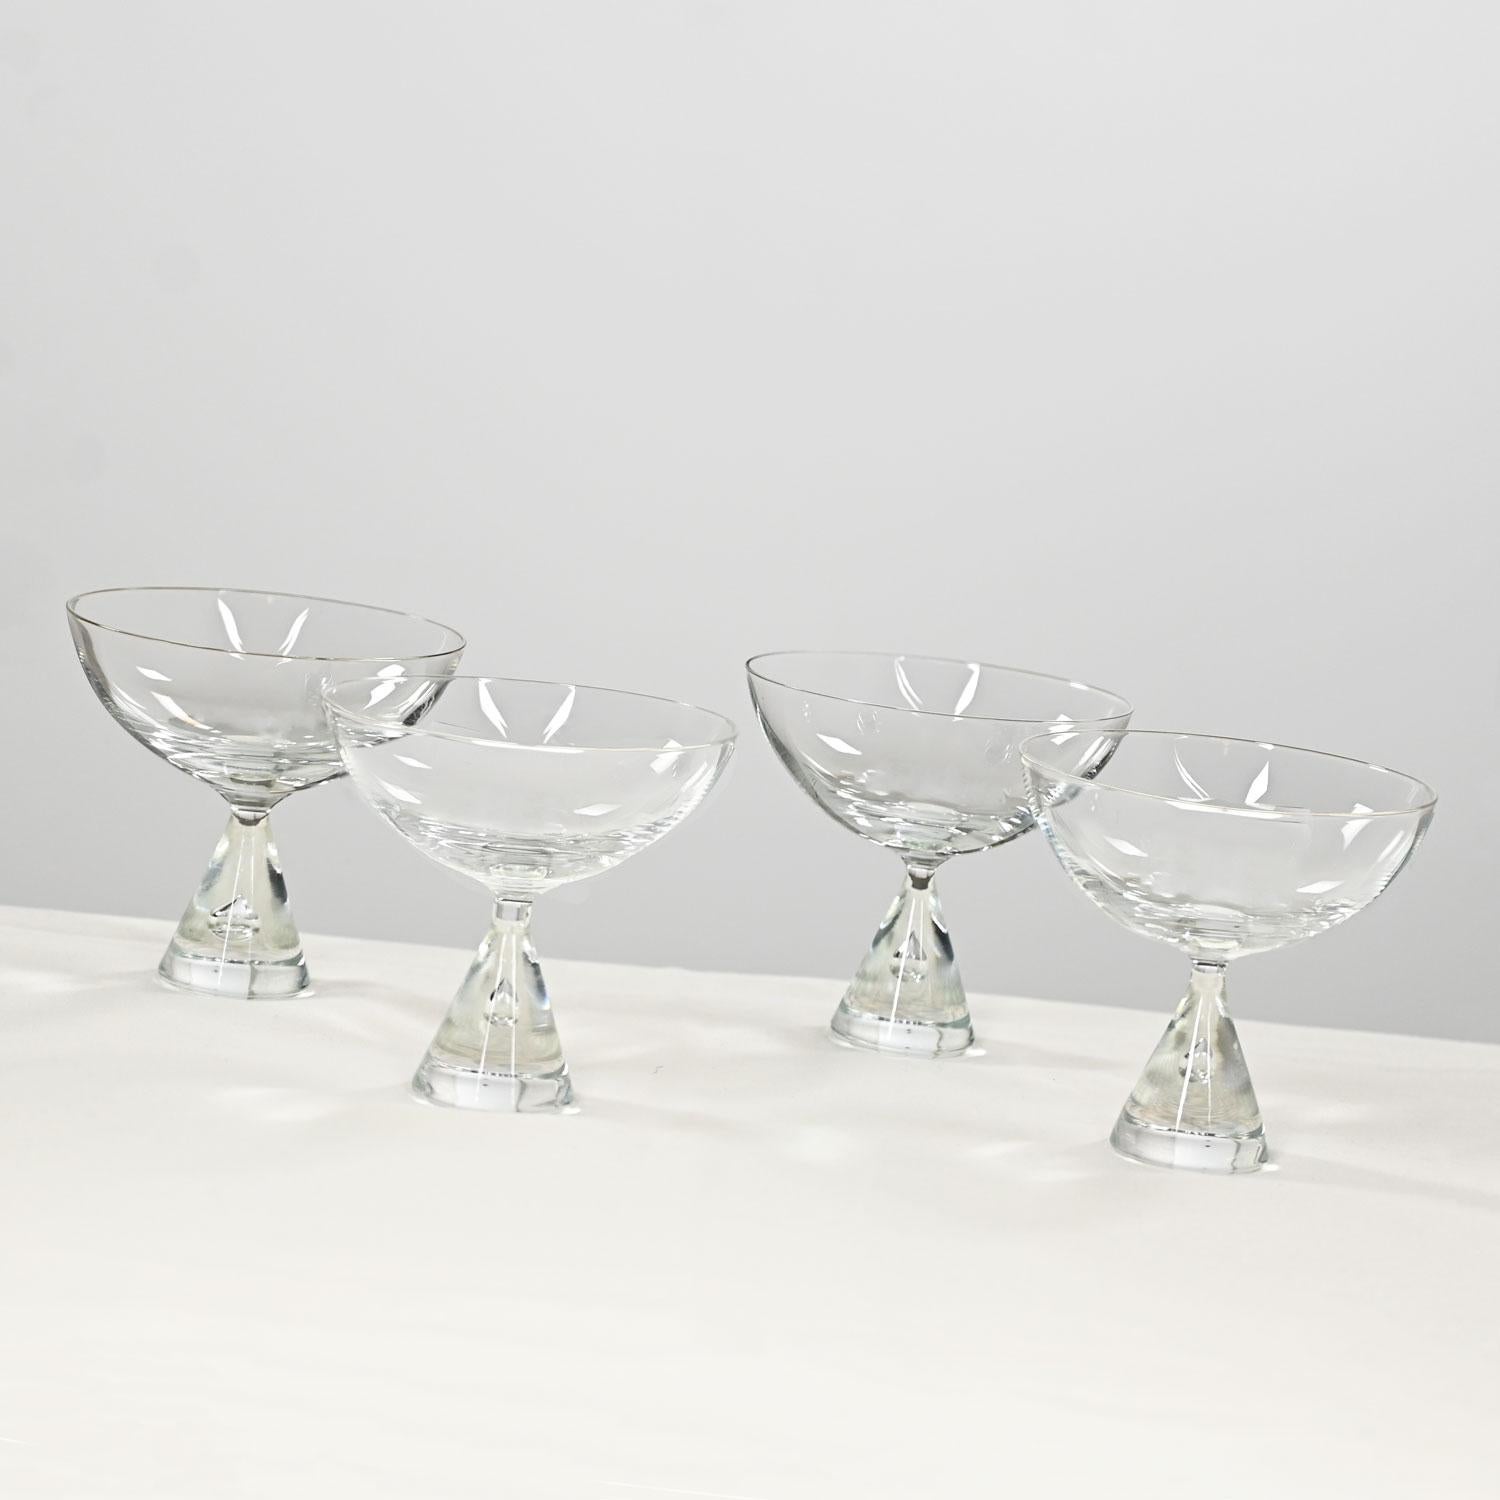 Fabulous vintage Bent Severin for Holmegaard Mid-Century Modern or Scandinavian Modern crystal princess tall sherbet or champagne glasses set of 4. Beautiful condition, keeping in mind that these are vintage and not new so will have signs of use and